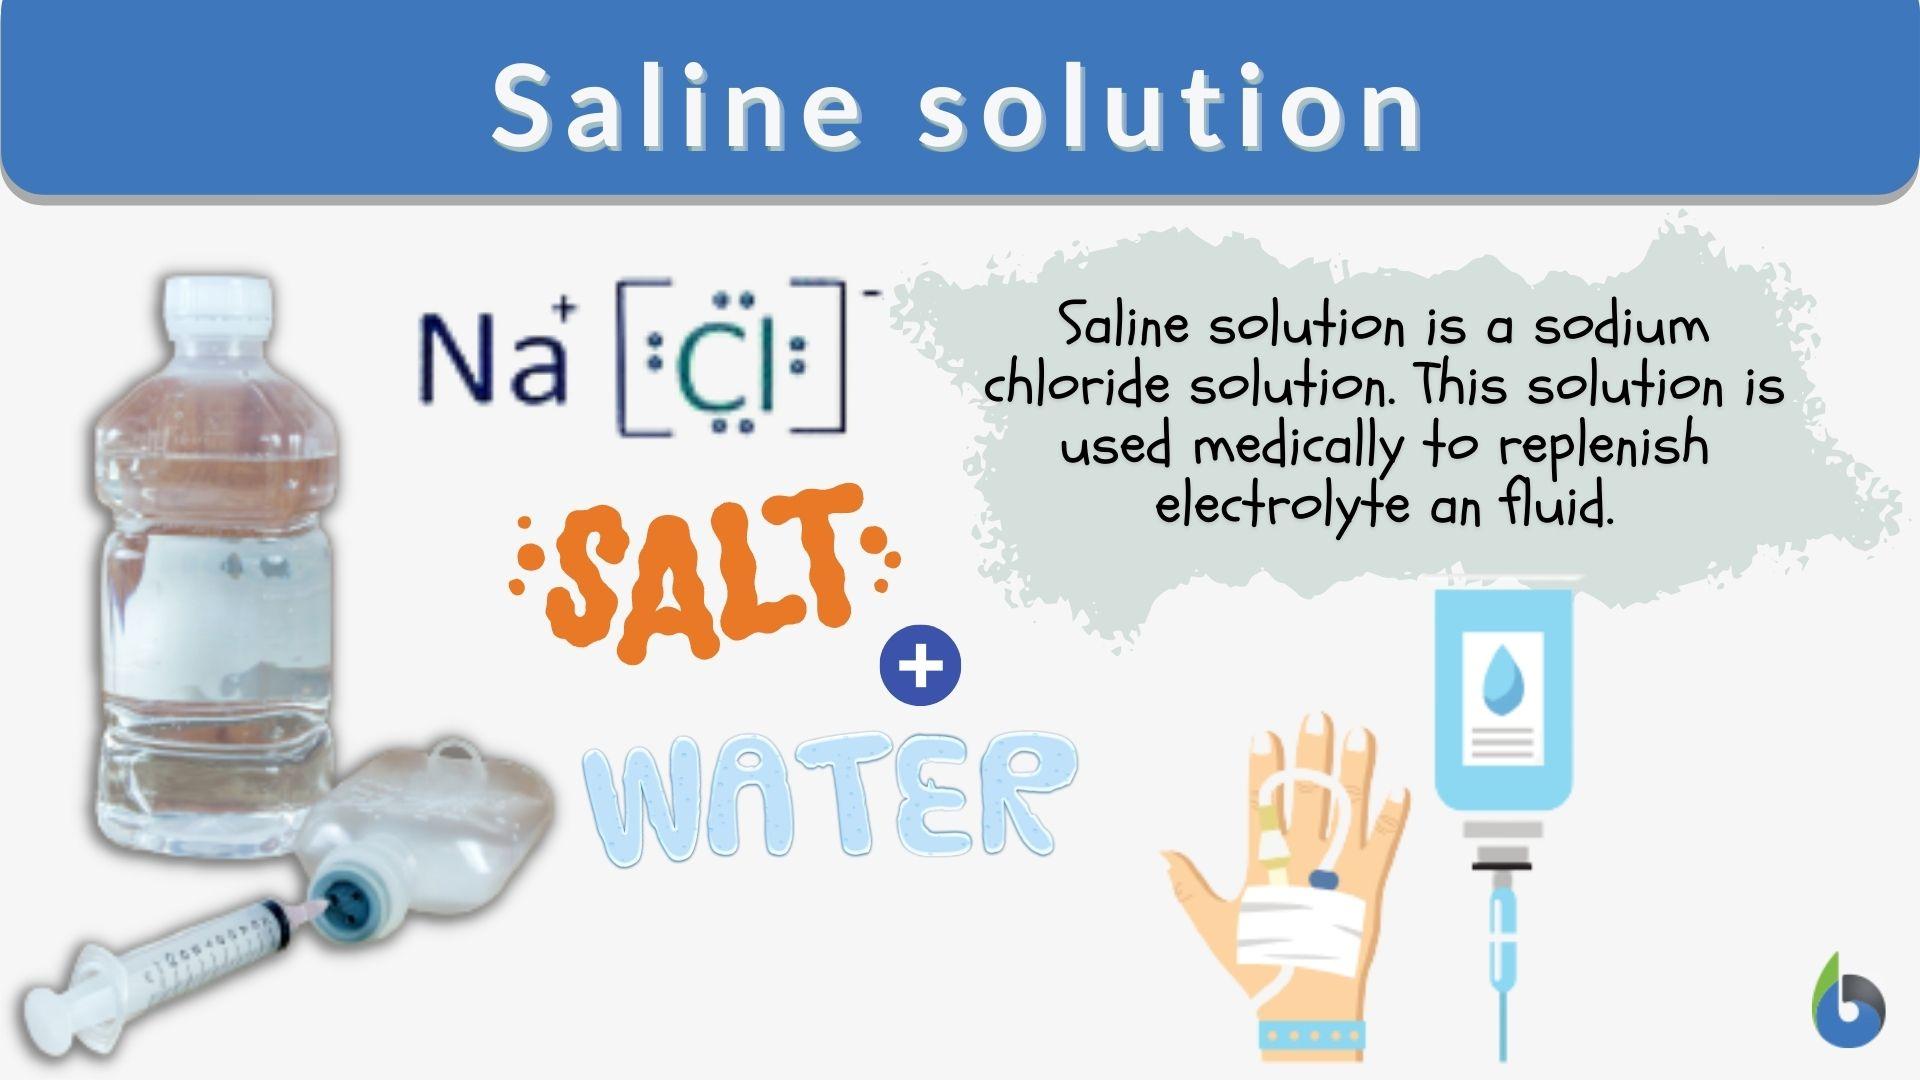 Saline solution - Definition and Examples - Biology Online Dictionary